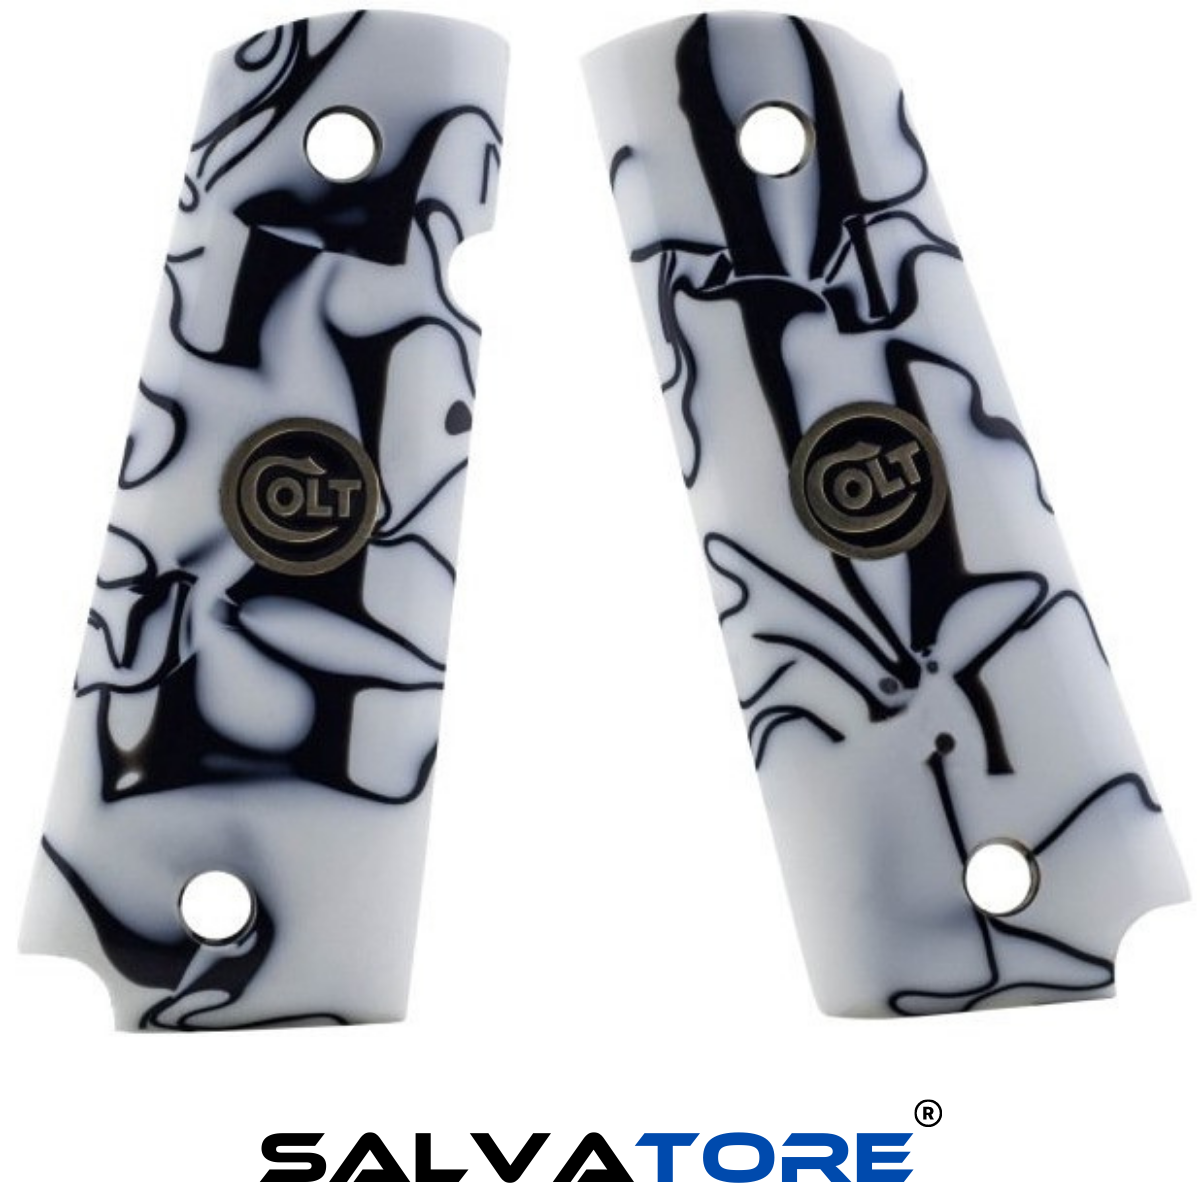 Salvatore Pistol Grips Revolver Grips For Colt 1911 Special Acrylic Gun Accessories Hunting Shooting